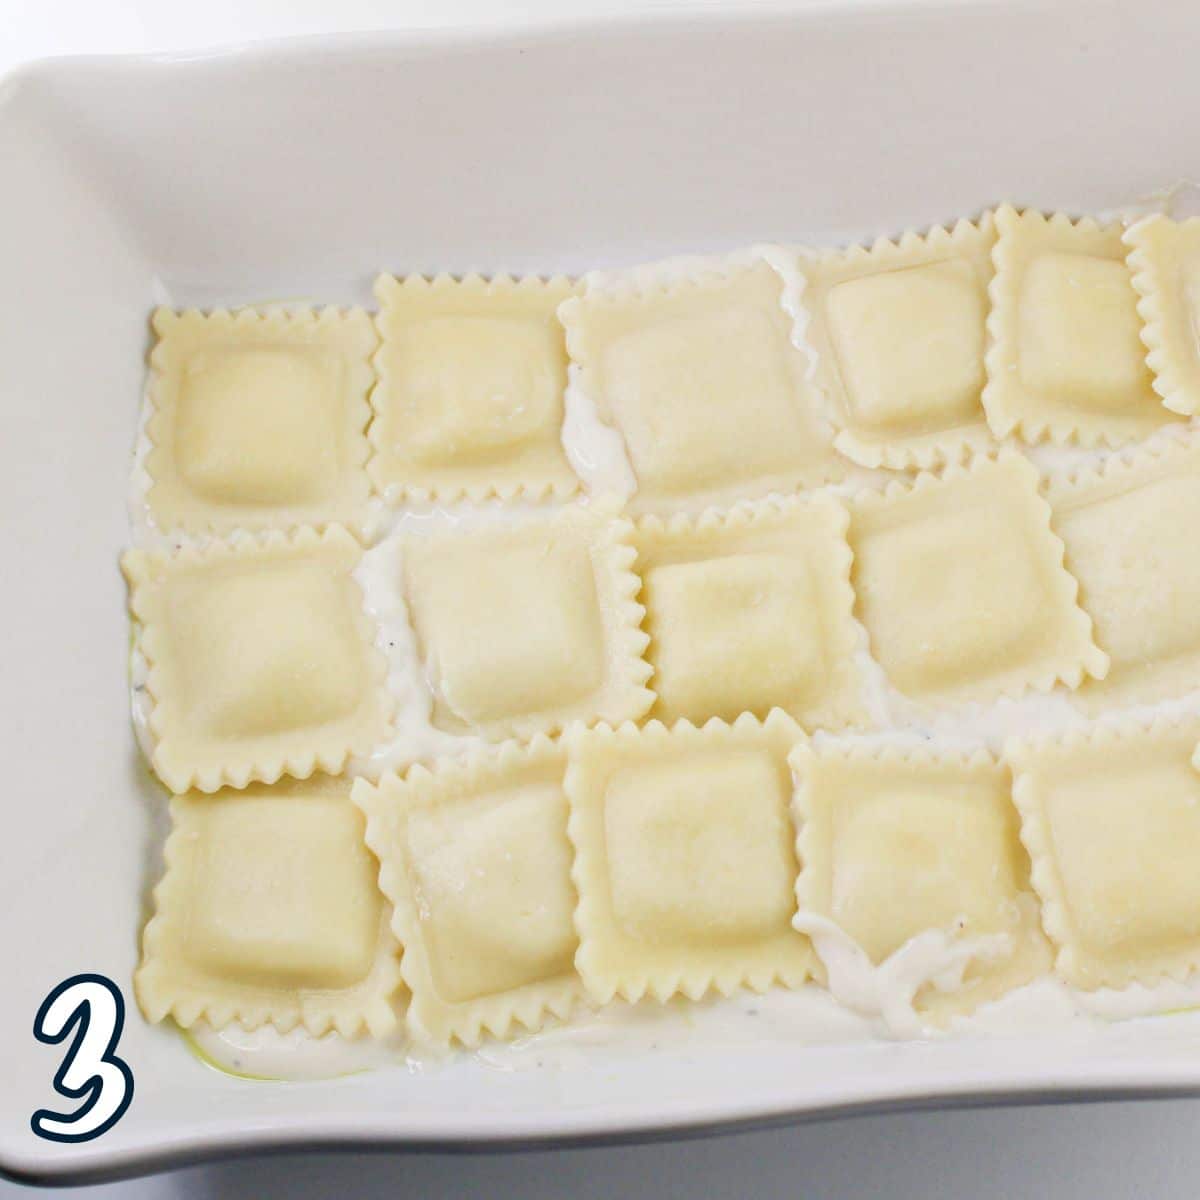 A baking dish filled with cooked ravioli arranged in a single layer on a light sauce. The number "3" is displayed in the bottom left corner.